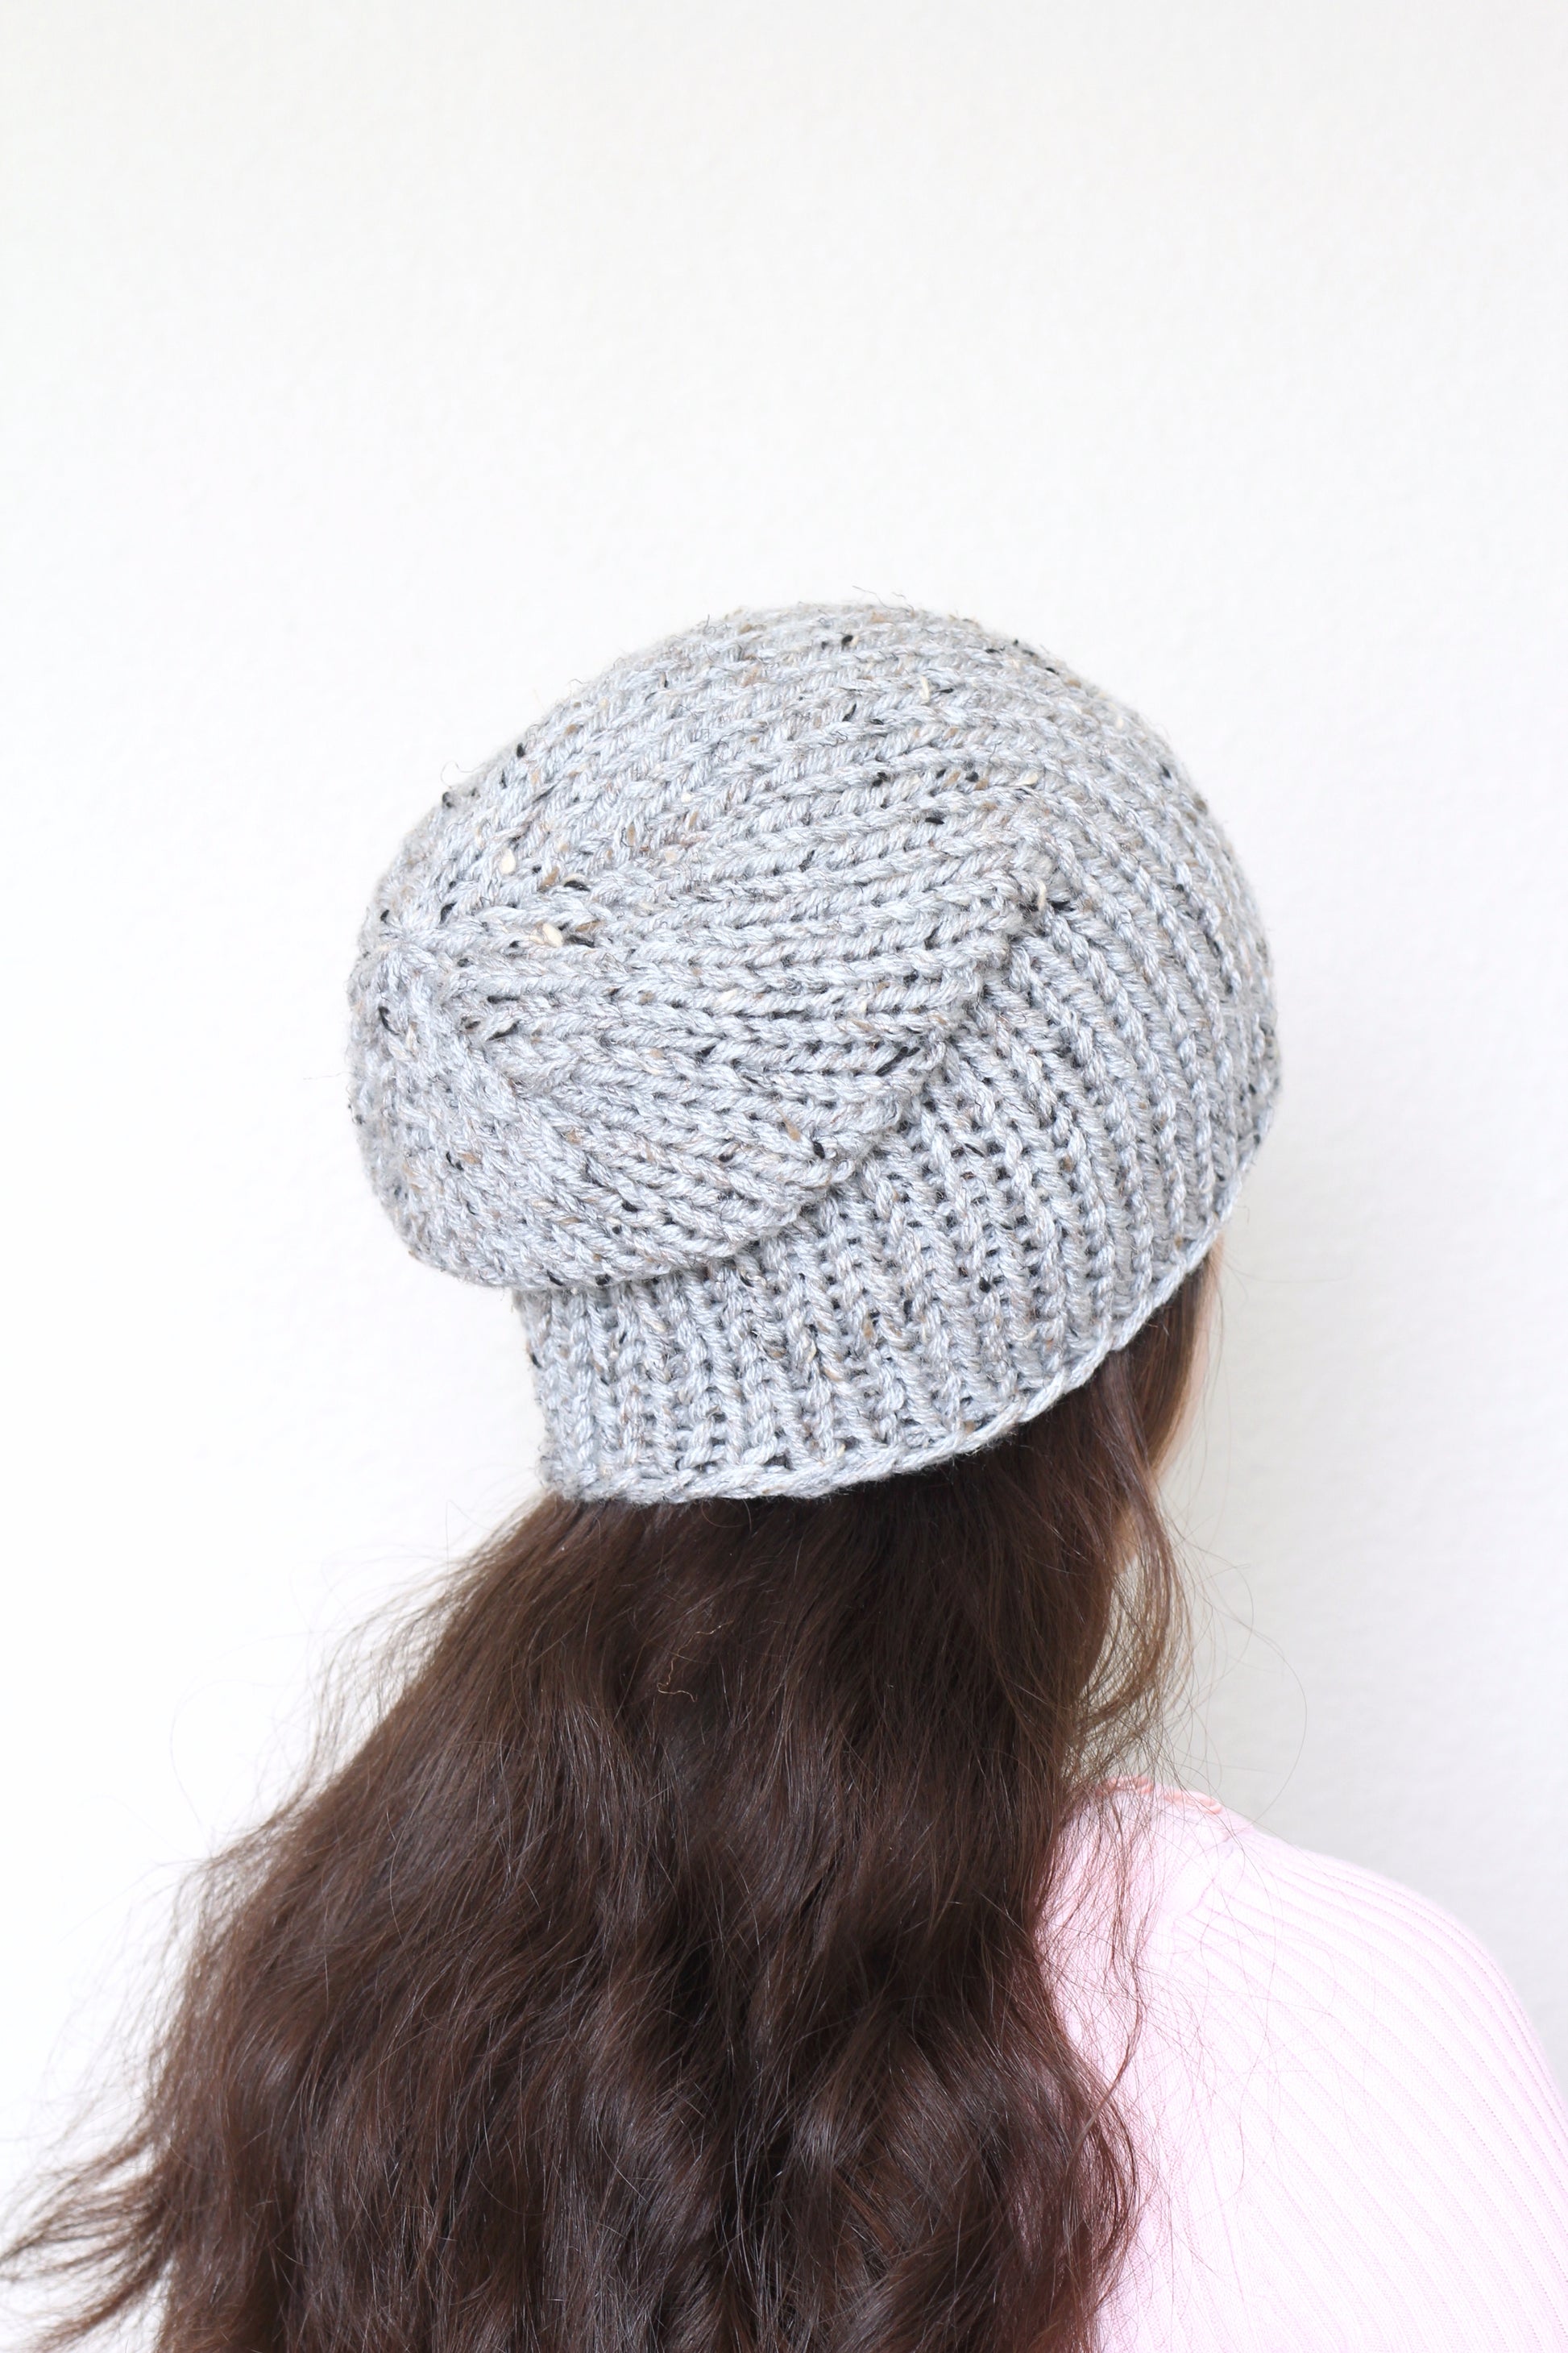 Beanie hat, knit hat, slouchy hat, knit beanie in taupe color